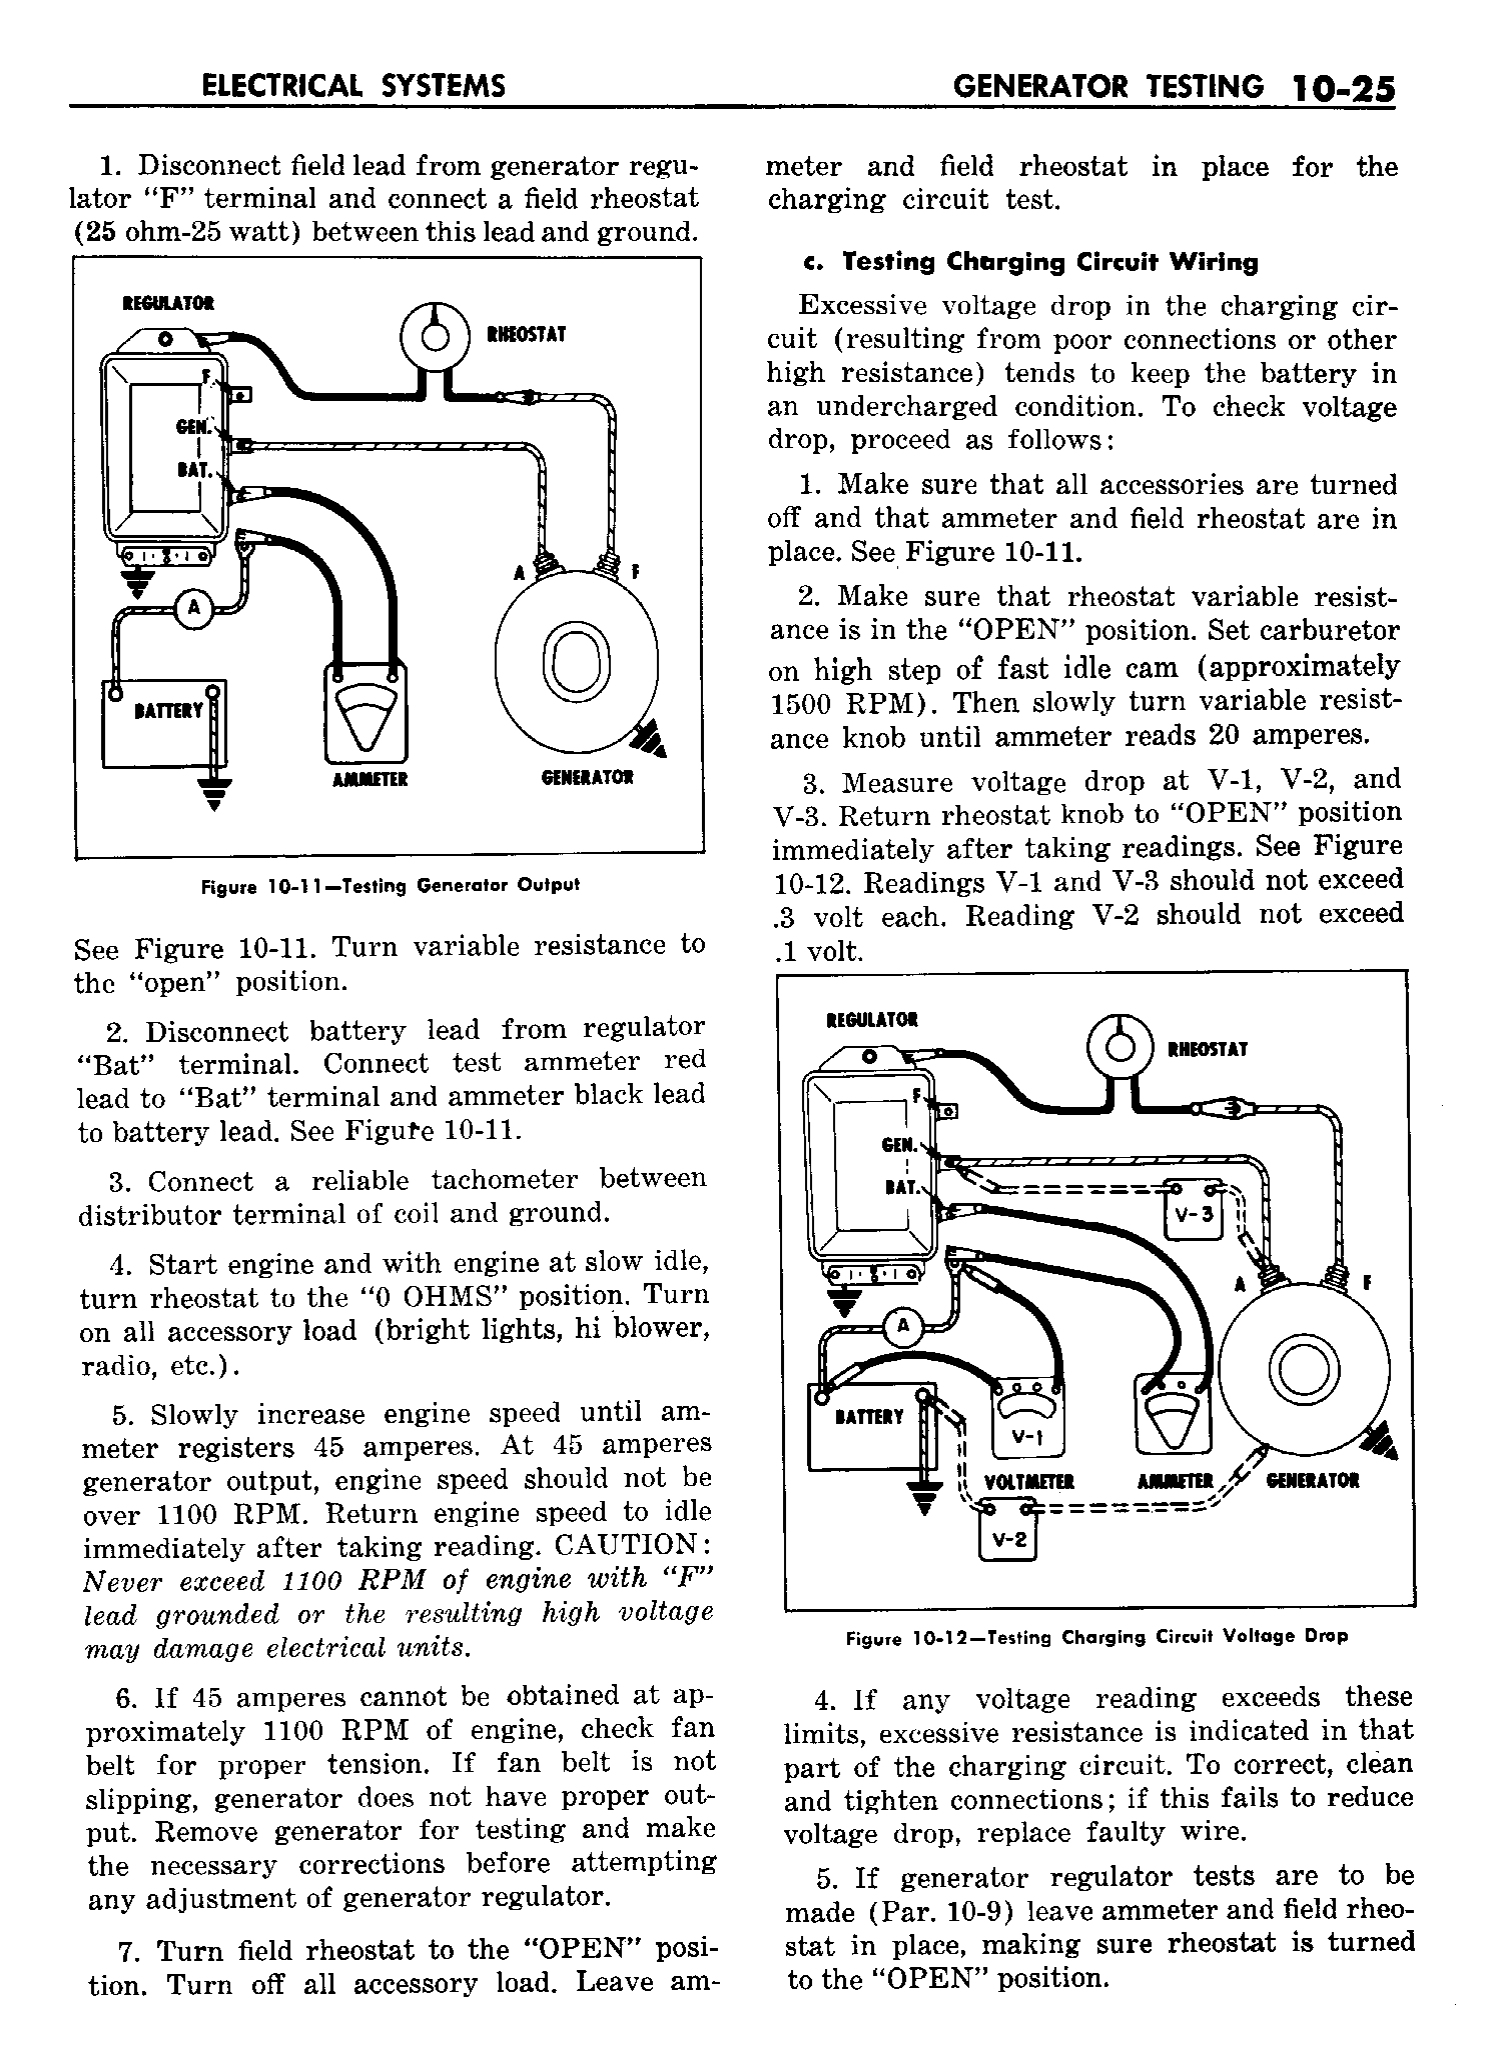 n_11 1958 Buick Shop Manual - Electrical Systems_25.jpg